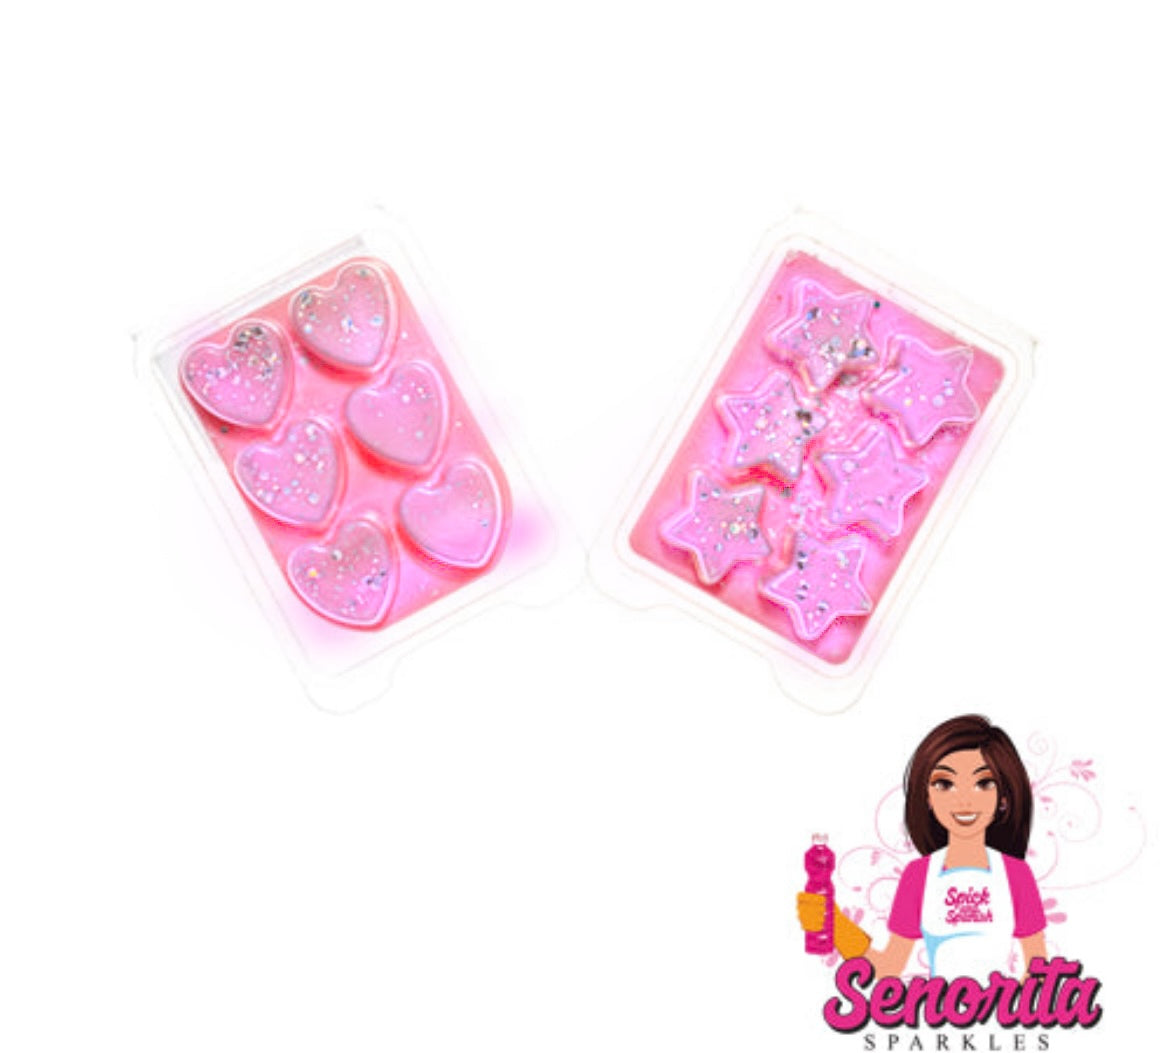 Wax melts Asevi pink mio clamshell